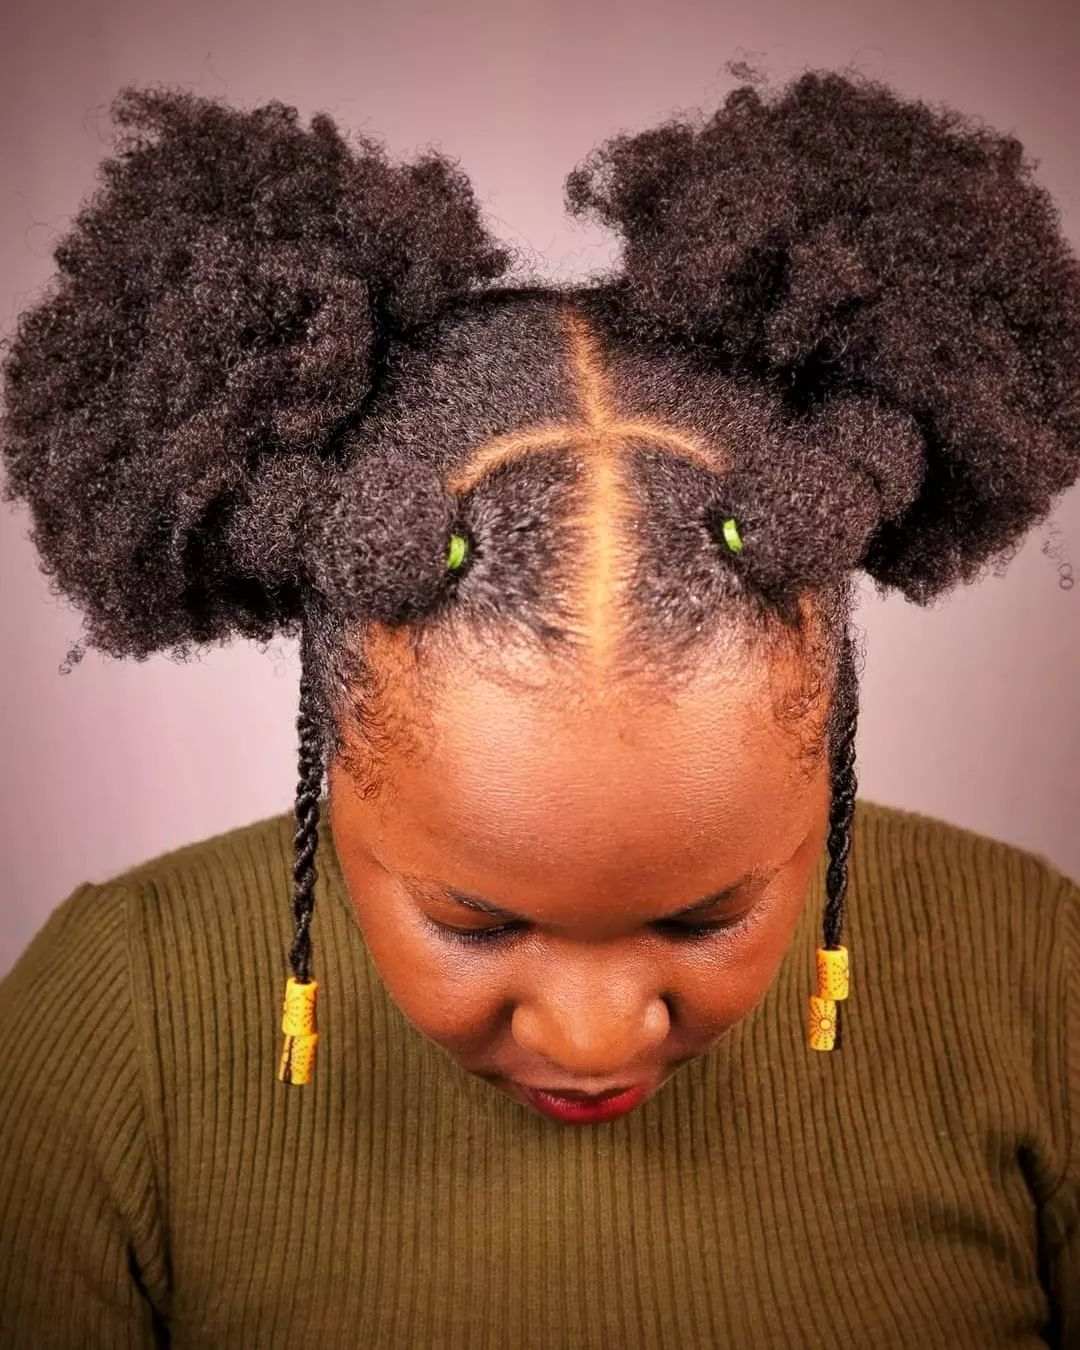 Natural 4c hairstyles with decoration